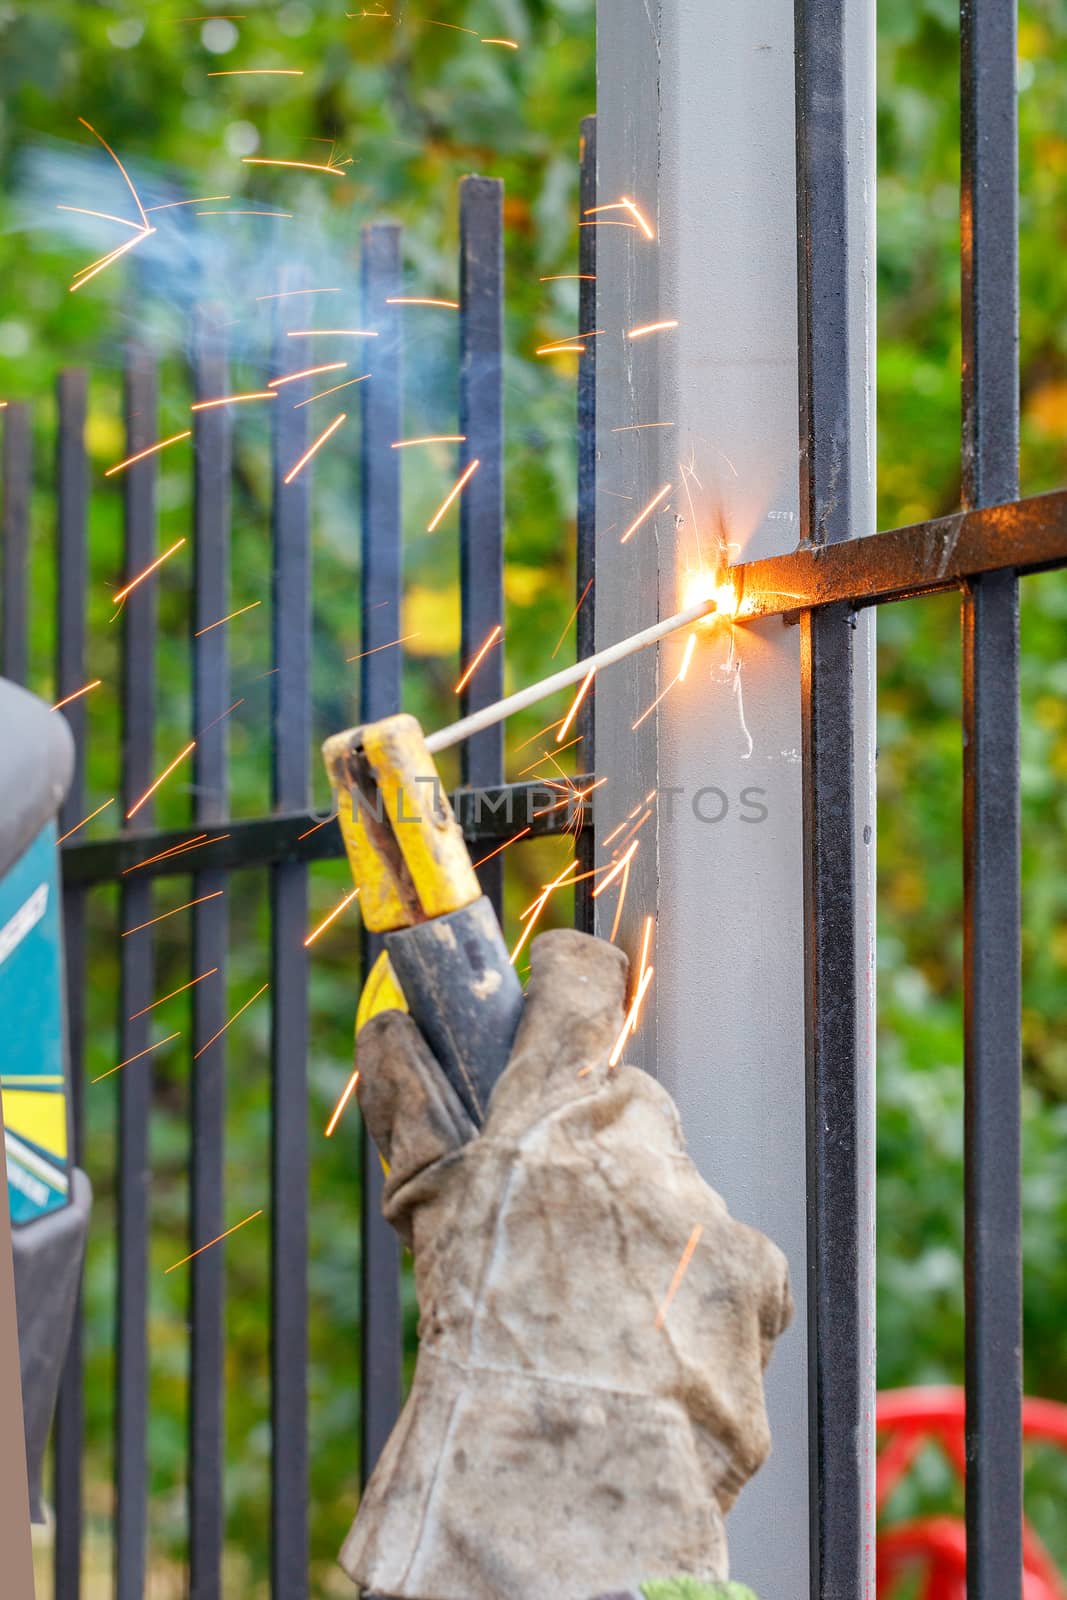 Hands of a welder in protective gloves in blur with an electrode weld a metal fence in a park area, bright sparks, blue smoke flying, selective focus, vertical image, copy space.